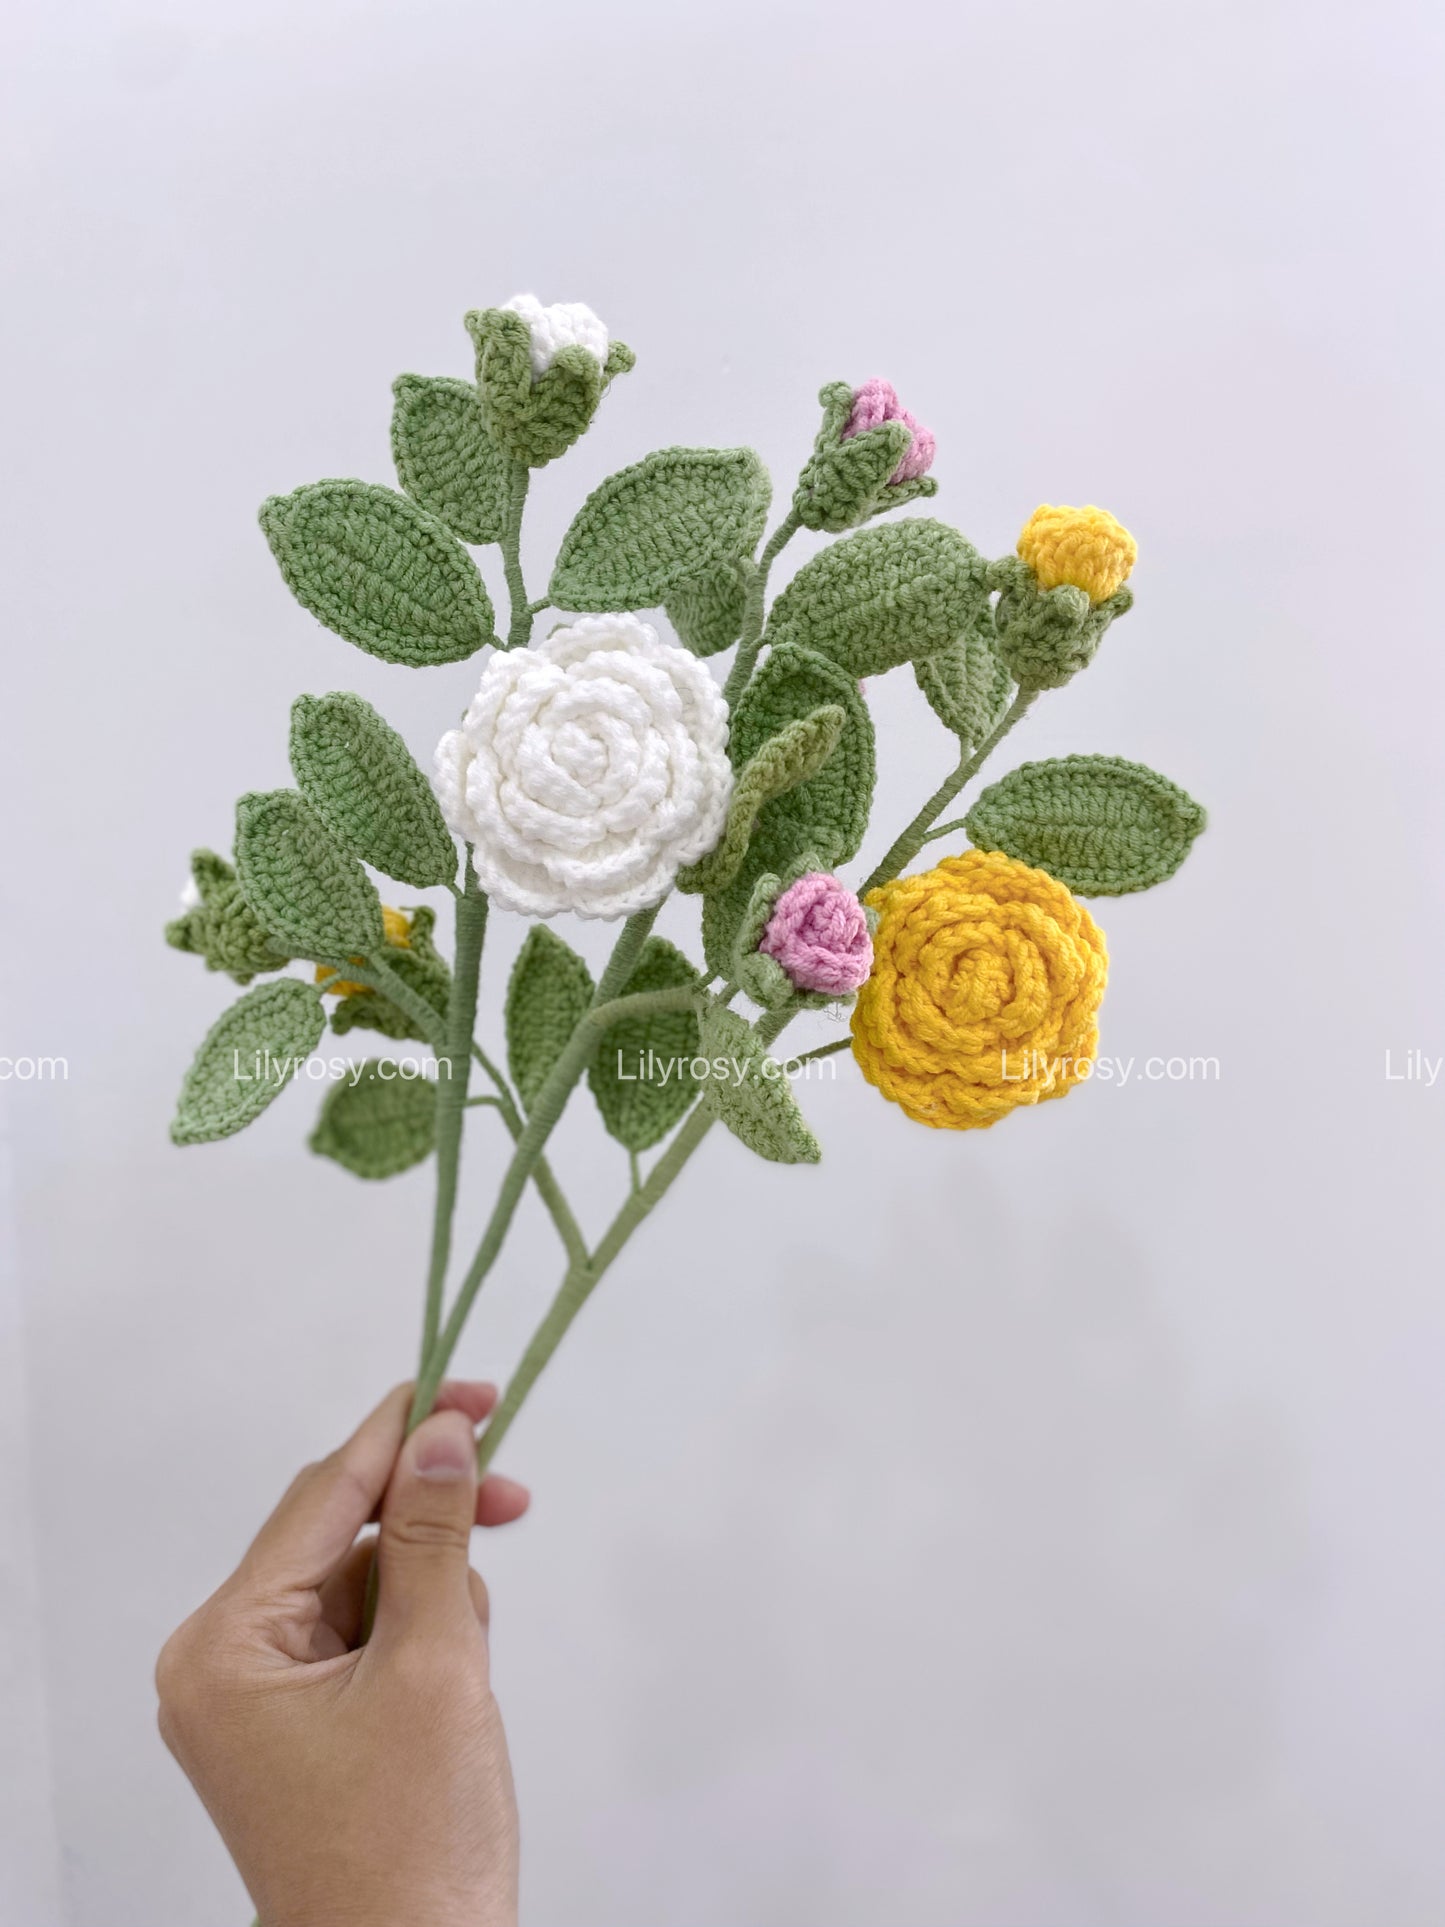 Lilyrosy Crochet Camellia Flowers Patterns with Step by Step Video Tutorial